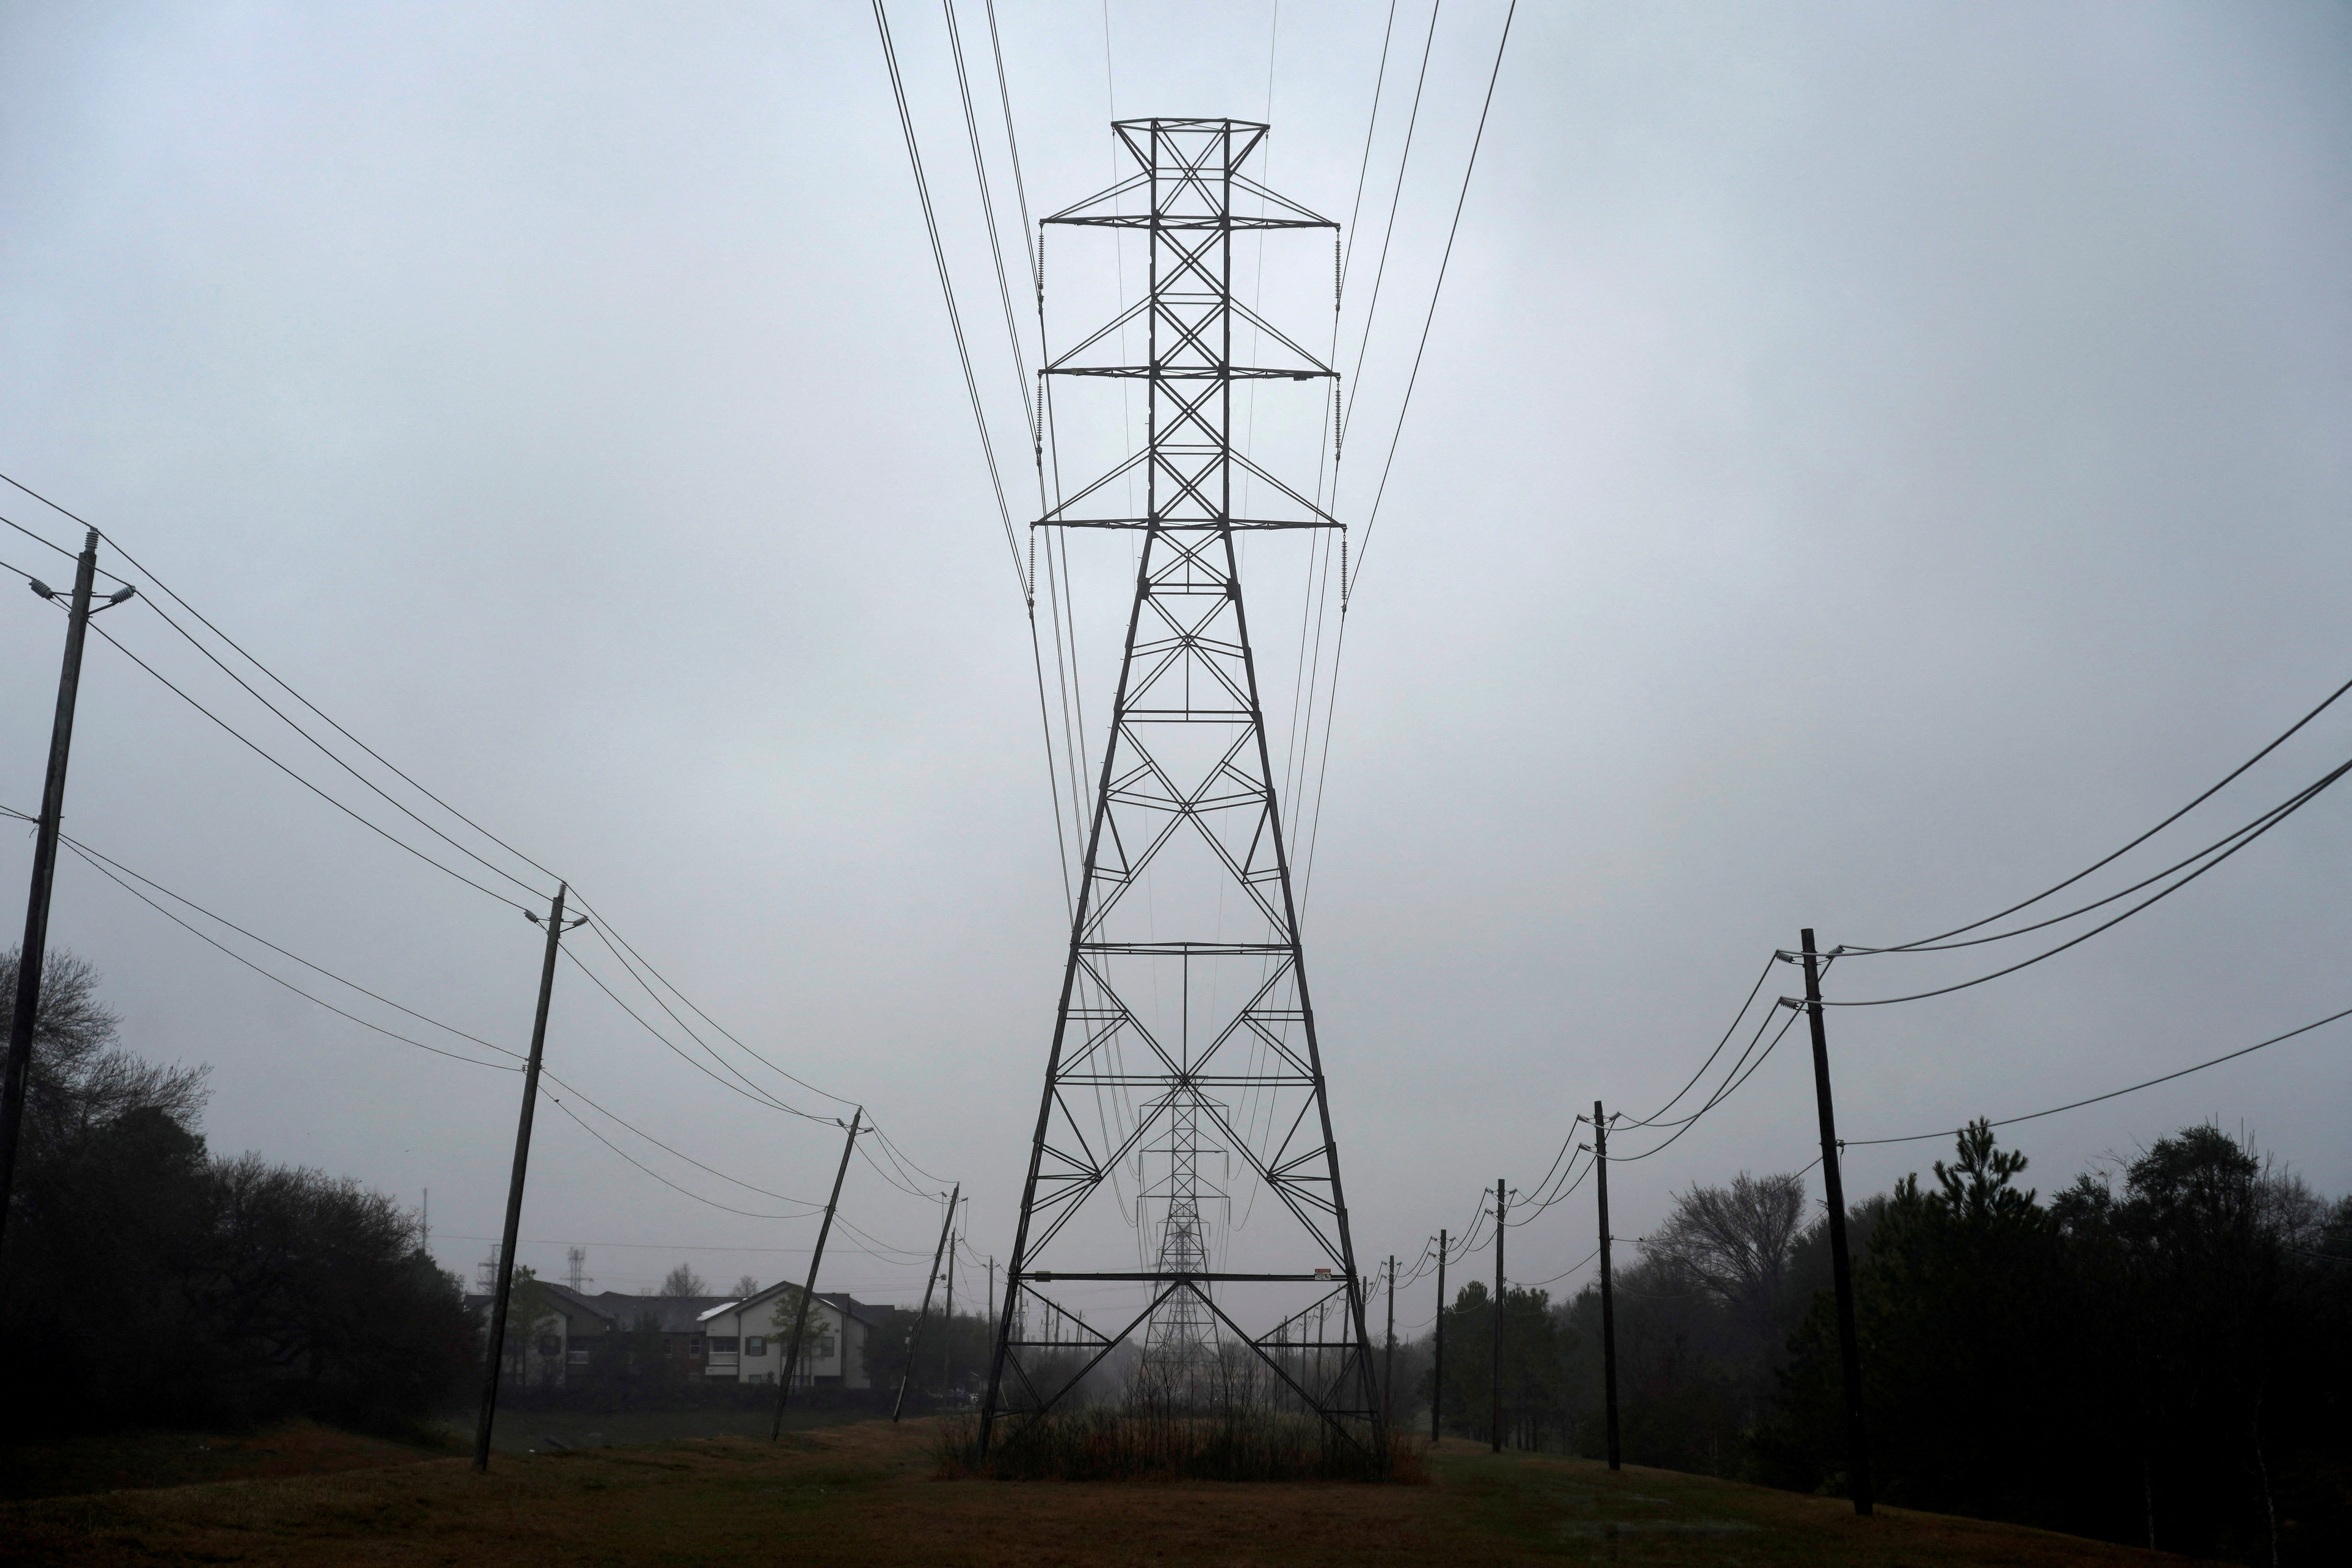 Winter weather caused electricity blackouts in Houston